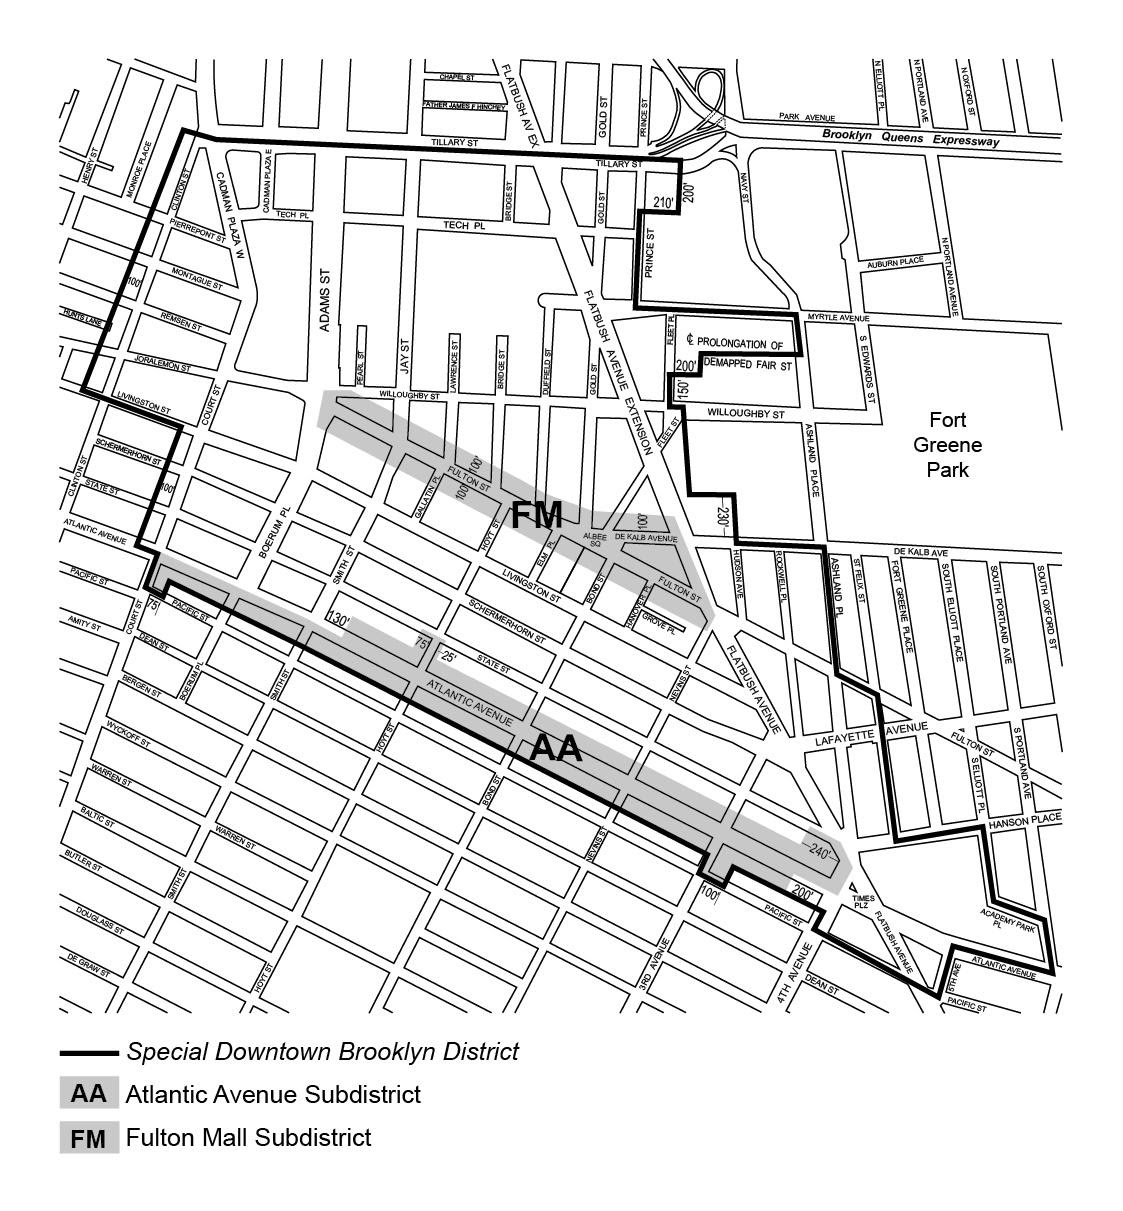 Zoning Resolutions Chapter 1: Special Downtown Brooklyn District Appendix E.0